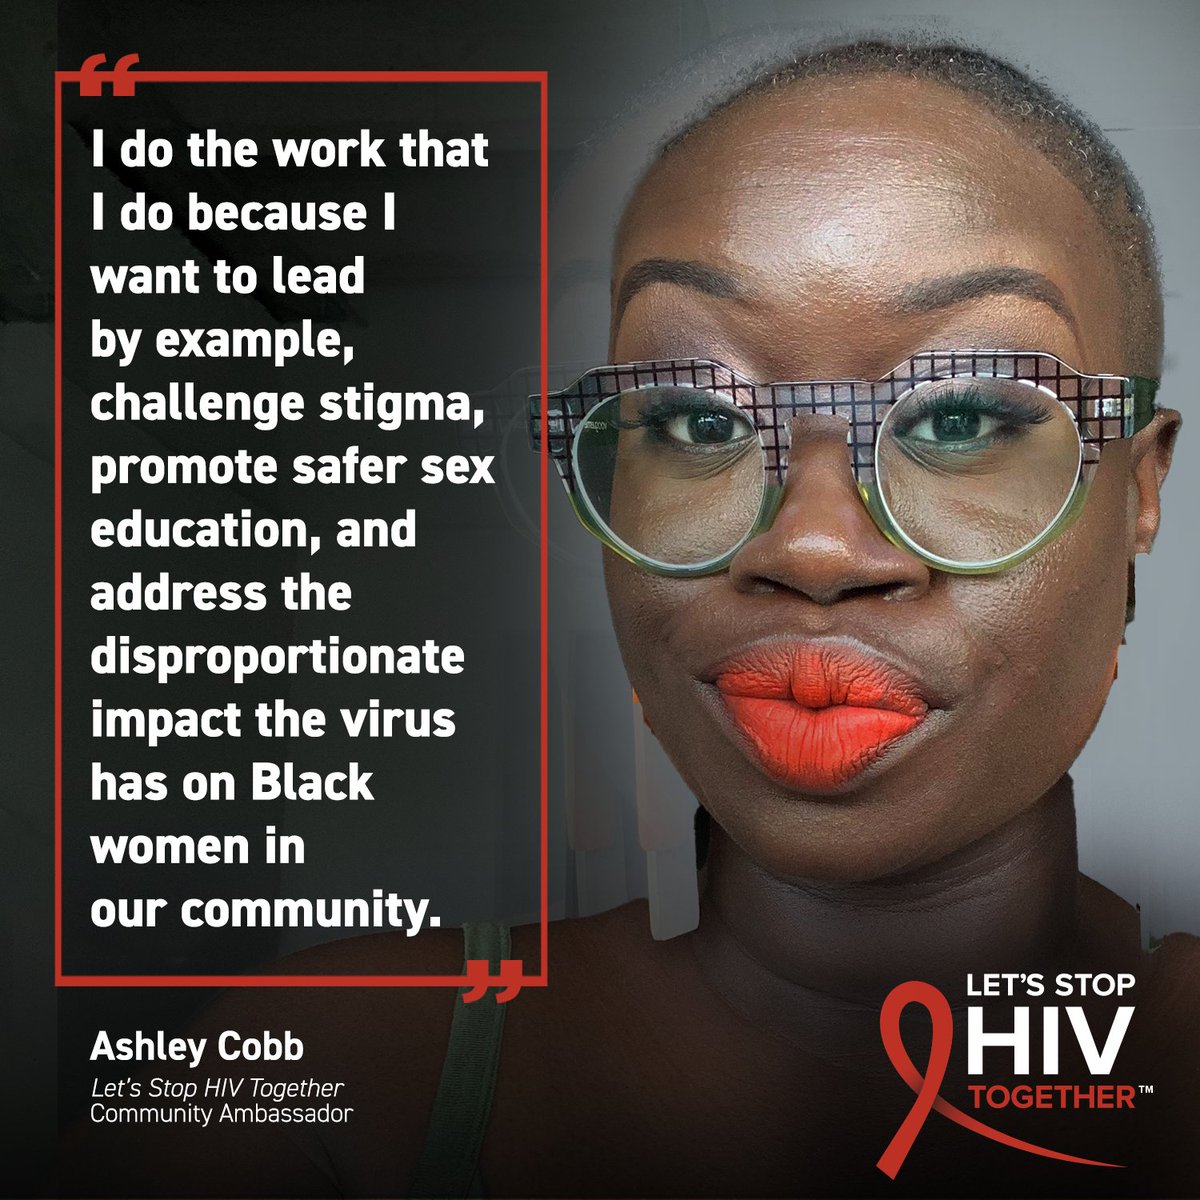 Let’s #StopHIVTogether Ambassador Spotlight: Meet Ashley Cobb (@sexwithashley_)! Ashley is passionate about taking steps to stop HIV stigma in her community and reduce the impact of HIV on Black women. #TogetherAmbassadorSpotlight #NWHW